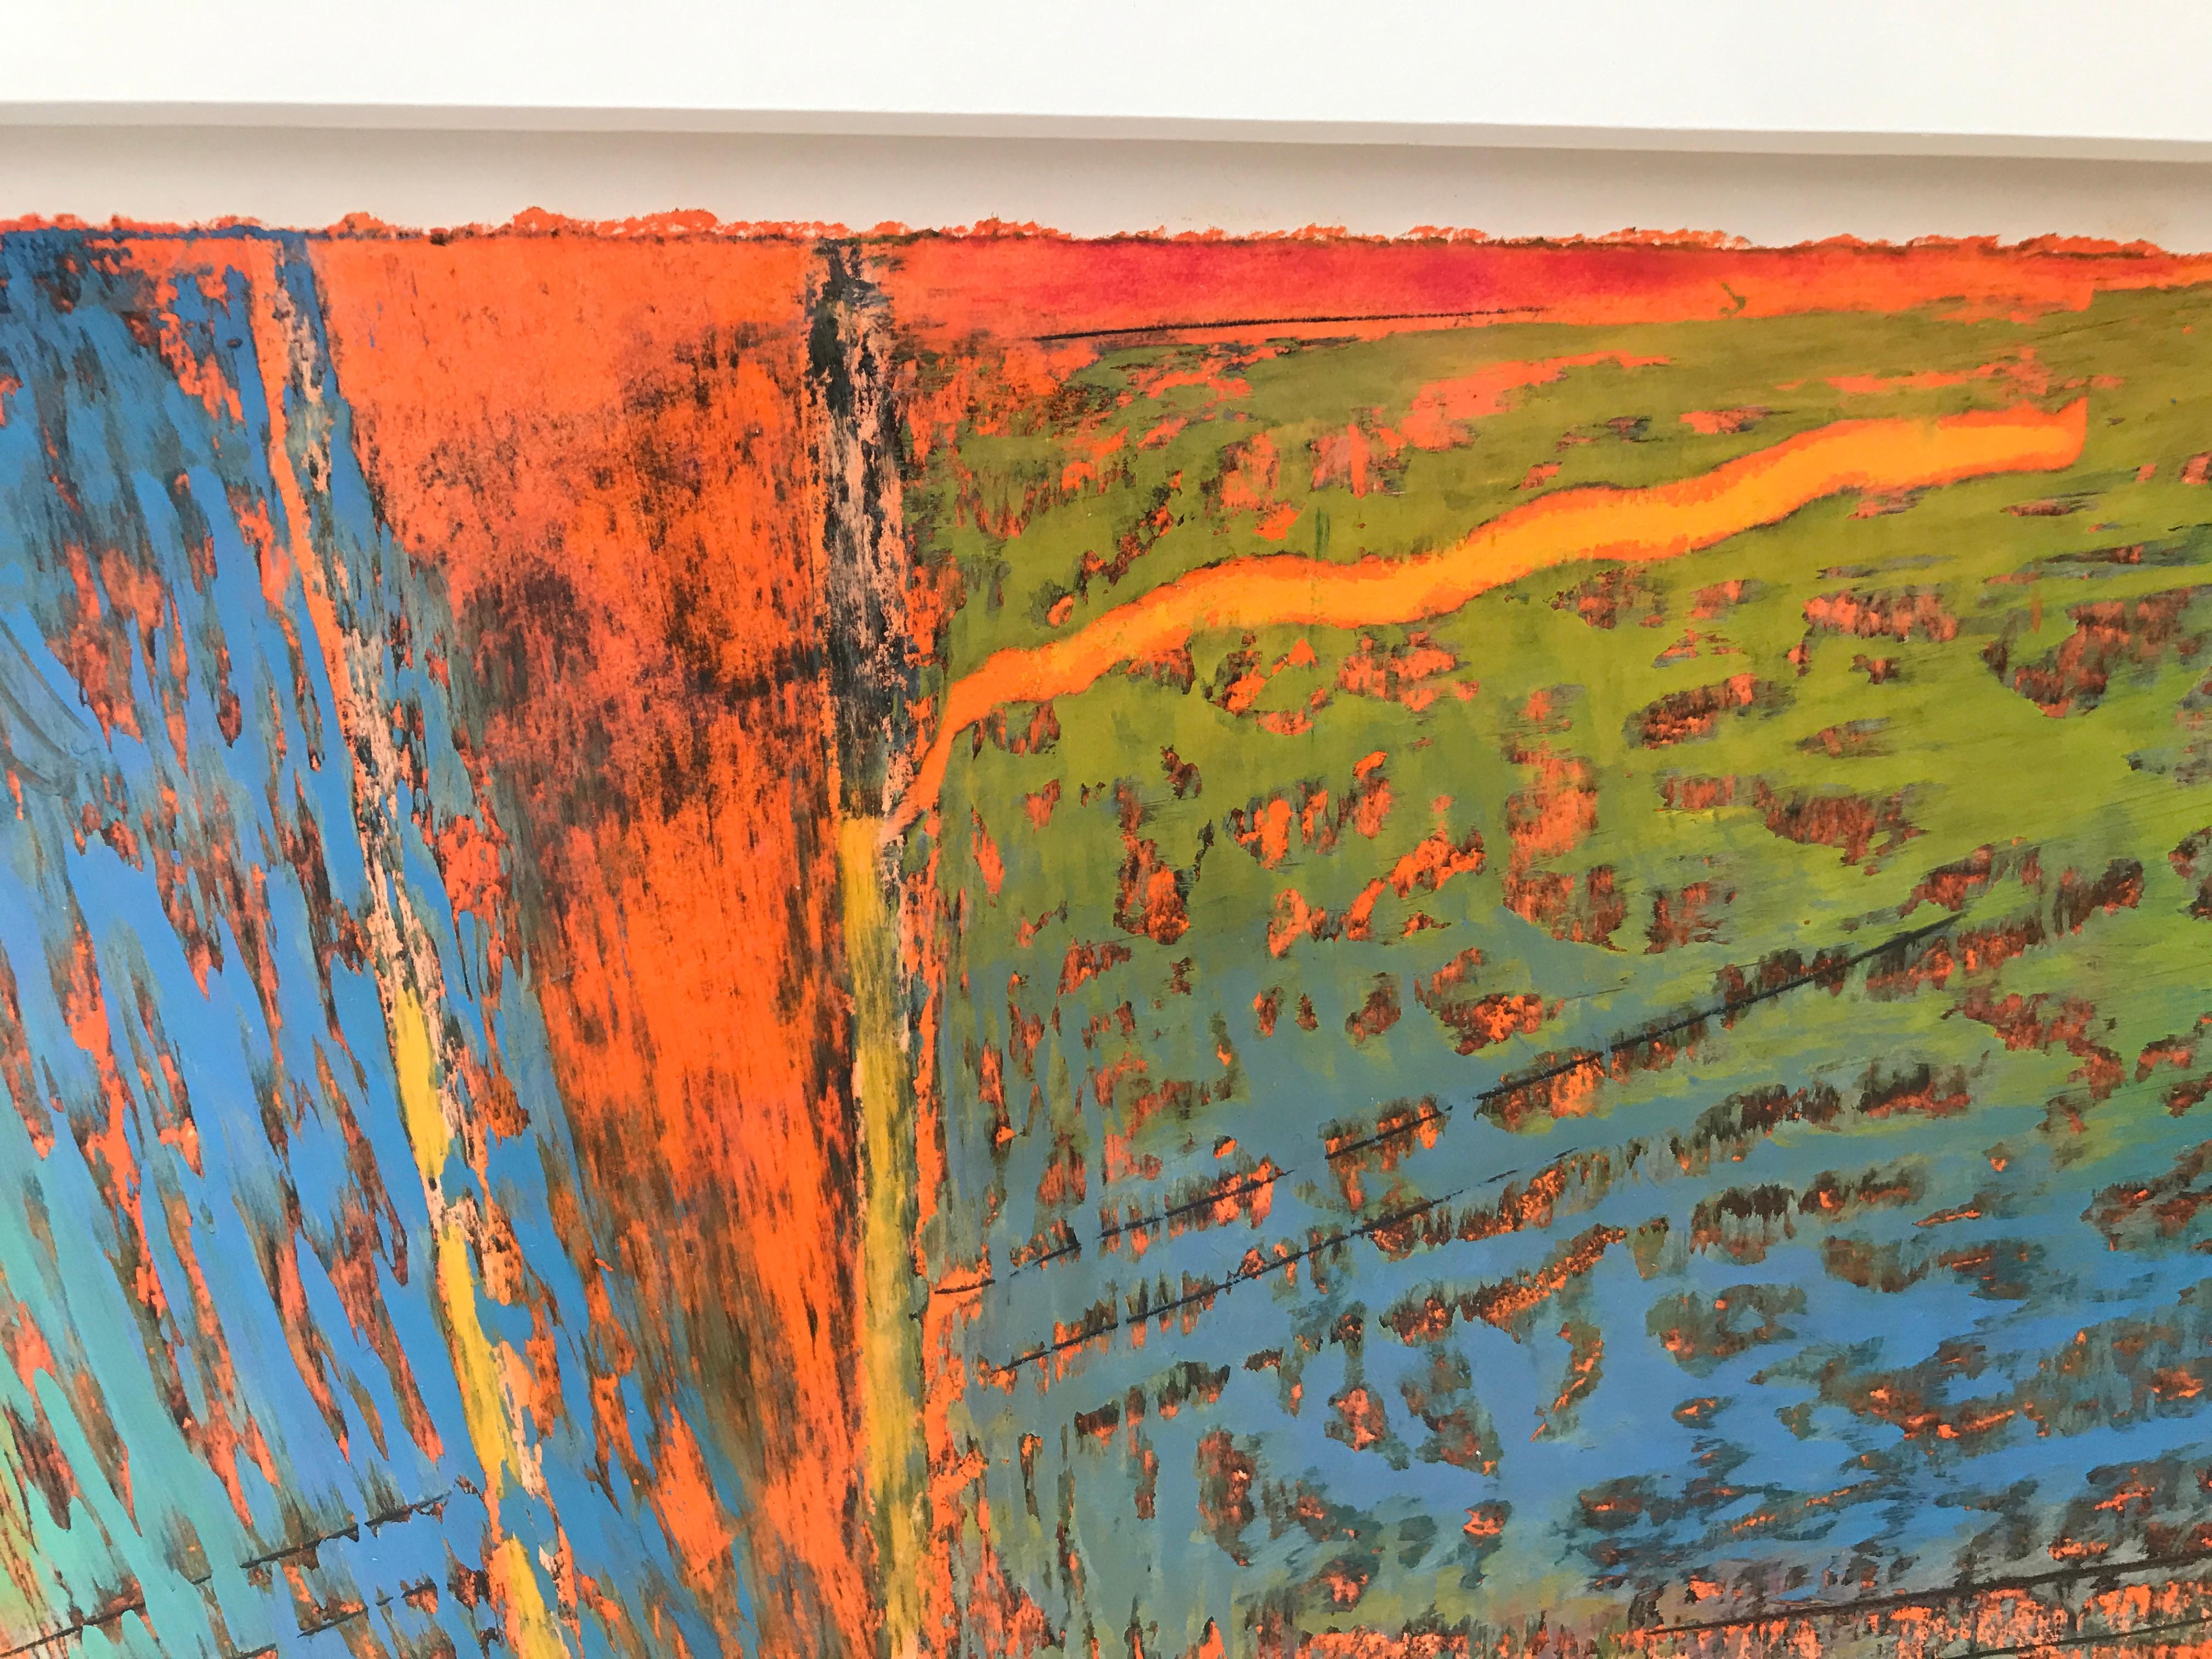 Herb Jackson merges the resonance of classical painting with the energy of Abstract Expressionism in his richly colored and textured abstractions. Jackson’s compositions have an organic look—suggesting, perhaps, cross-sections of geological strata